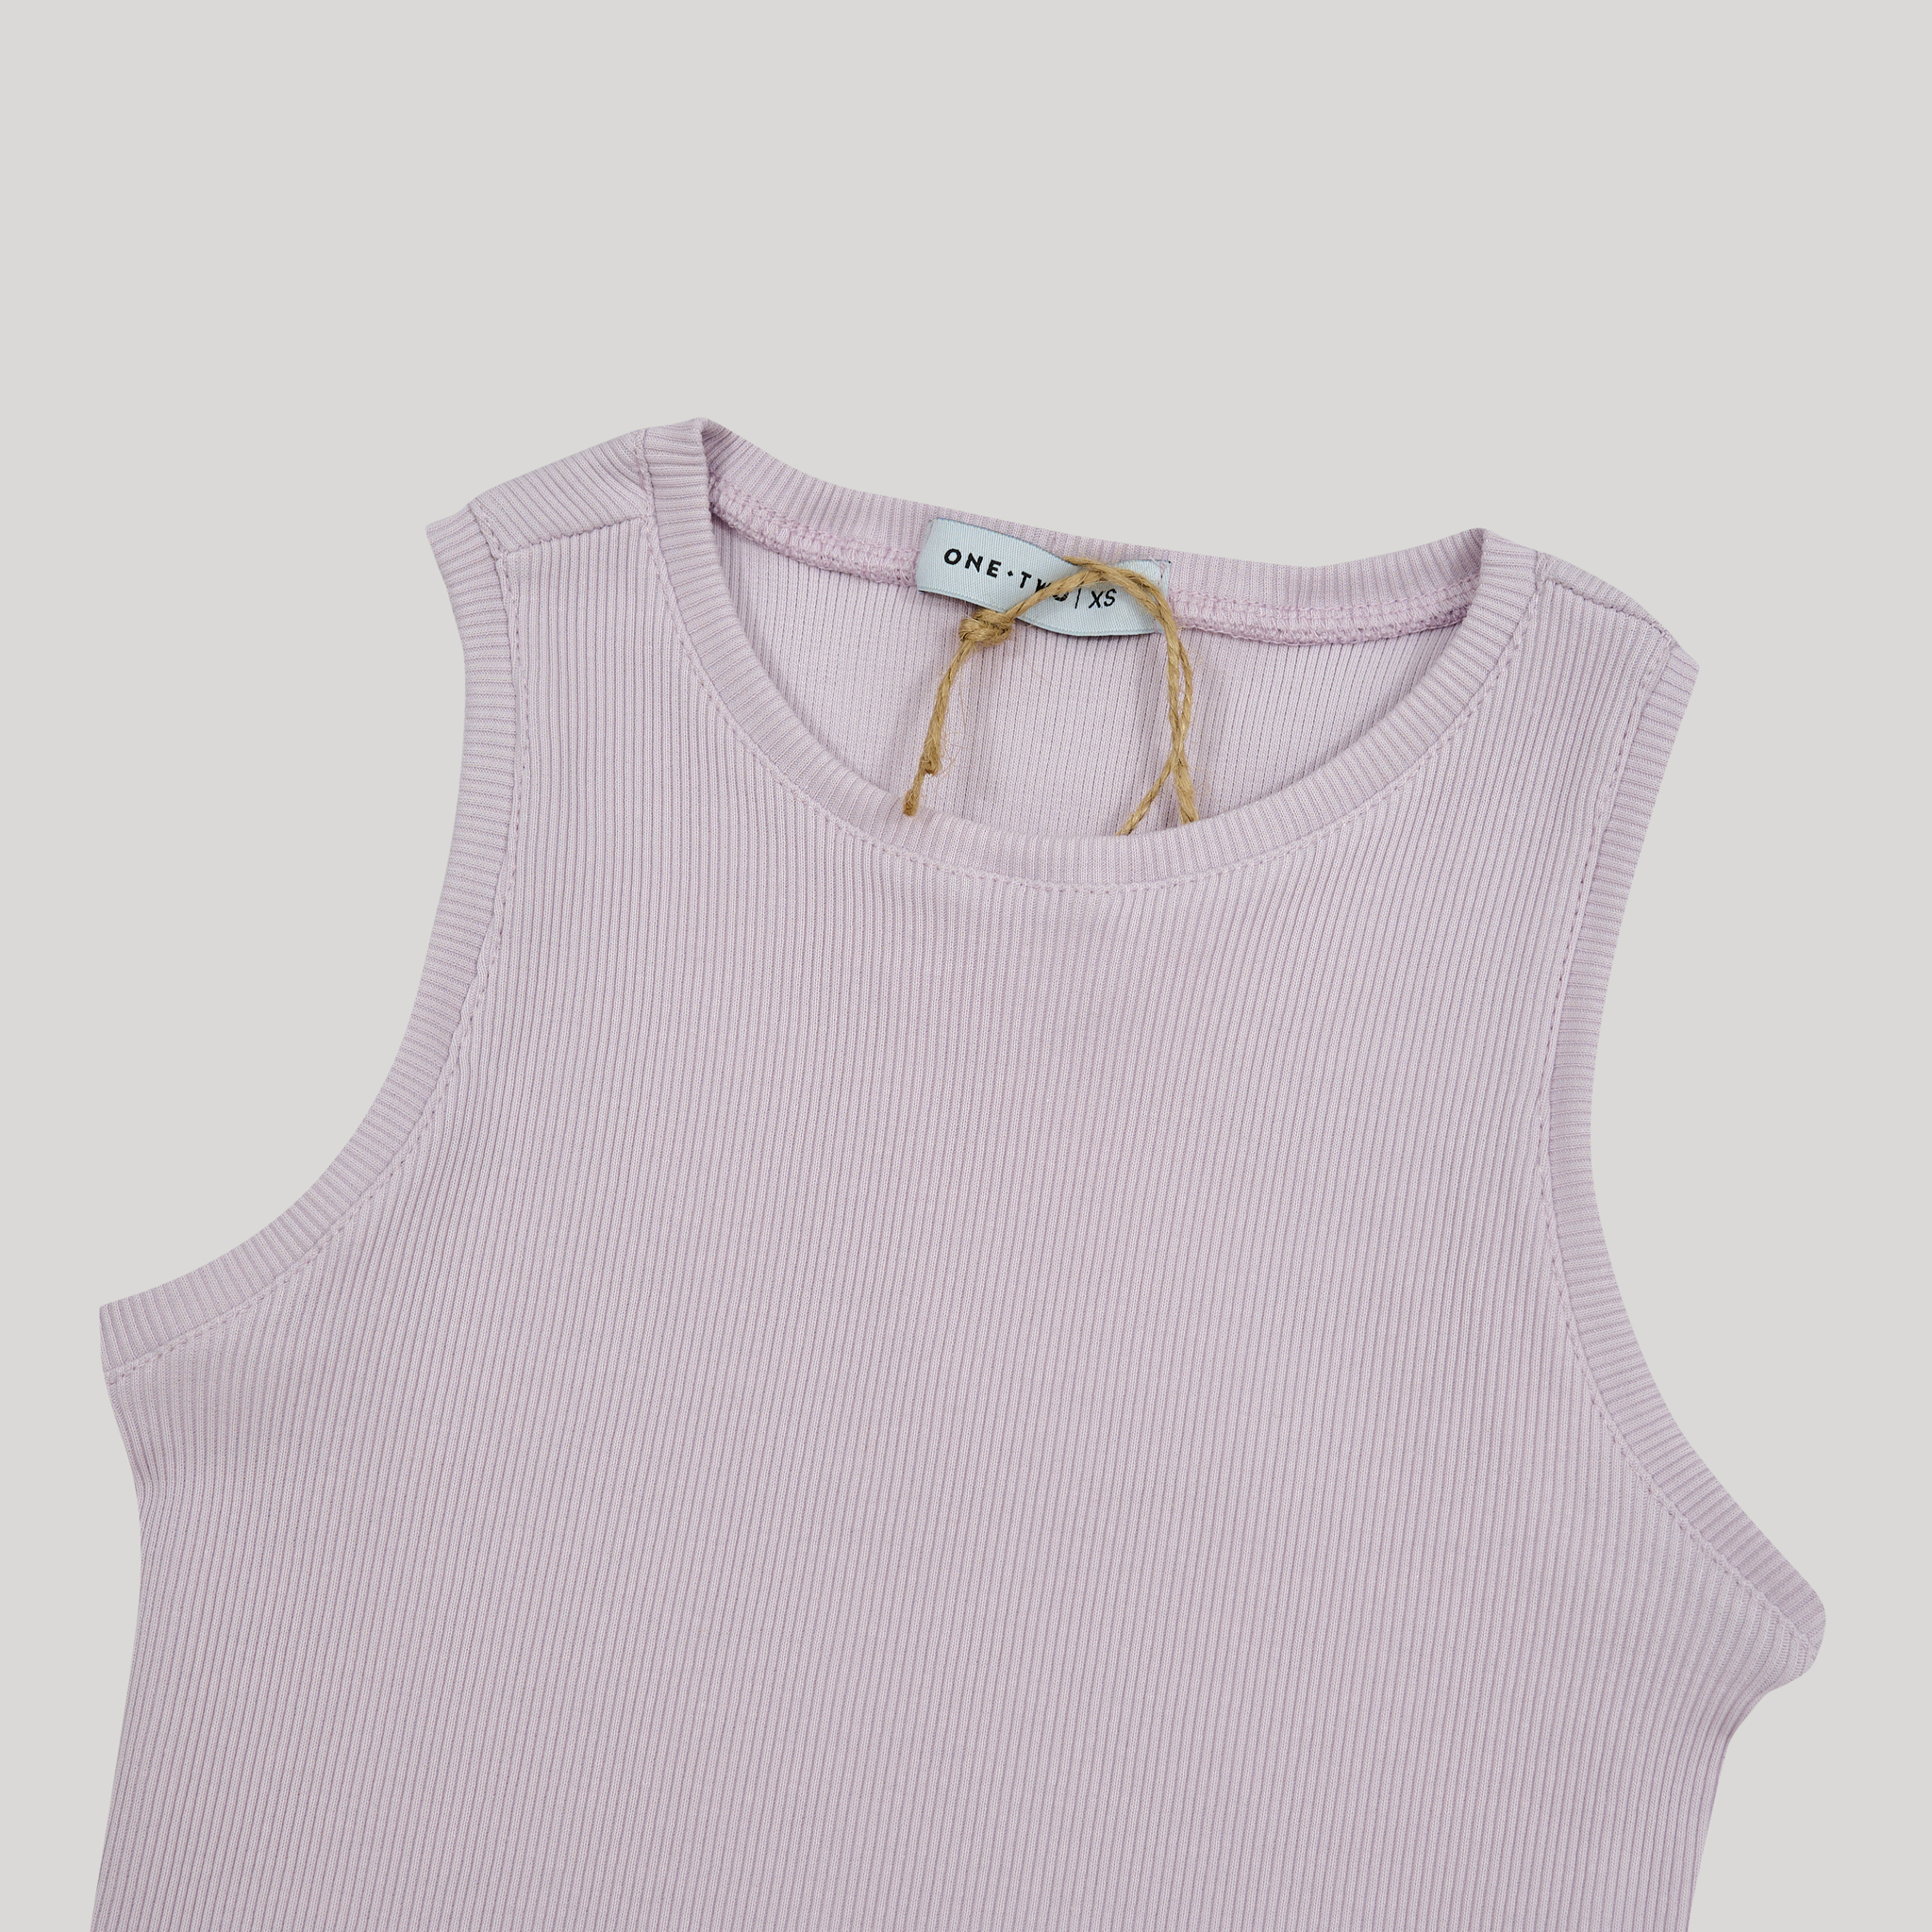 Ribbed Crop Top Orchid Hush